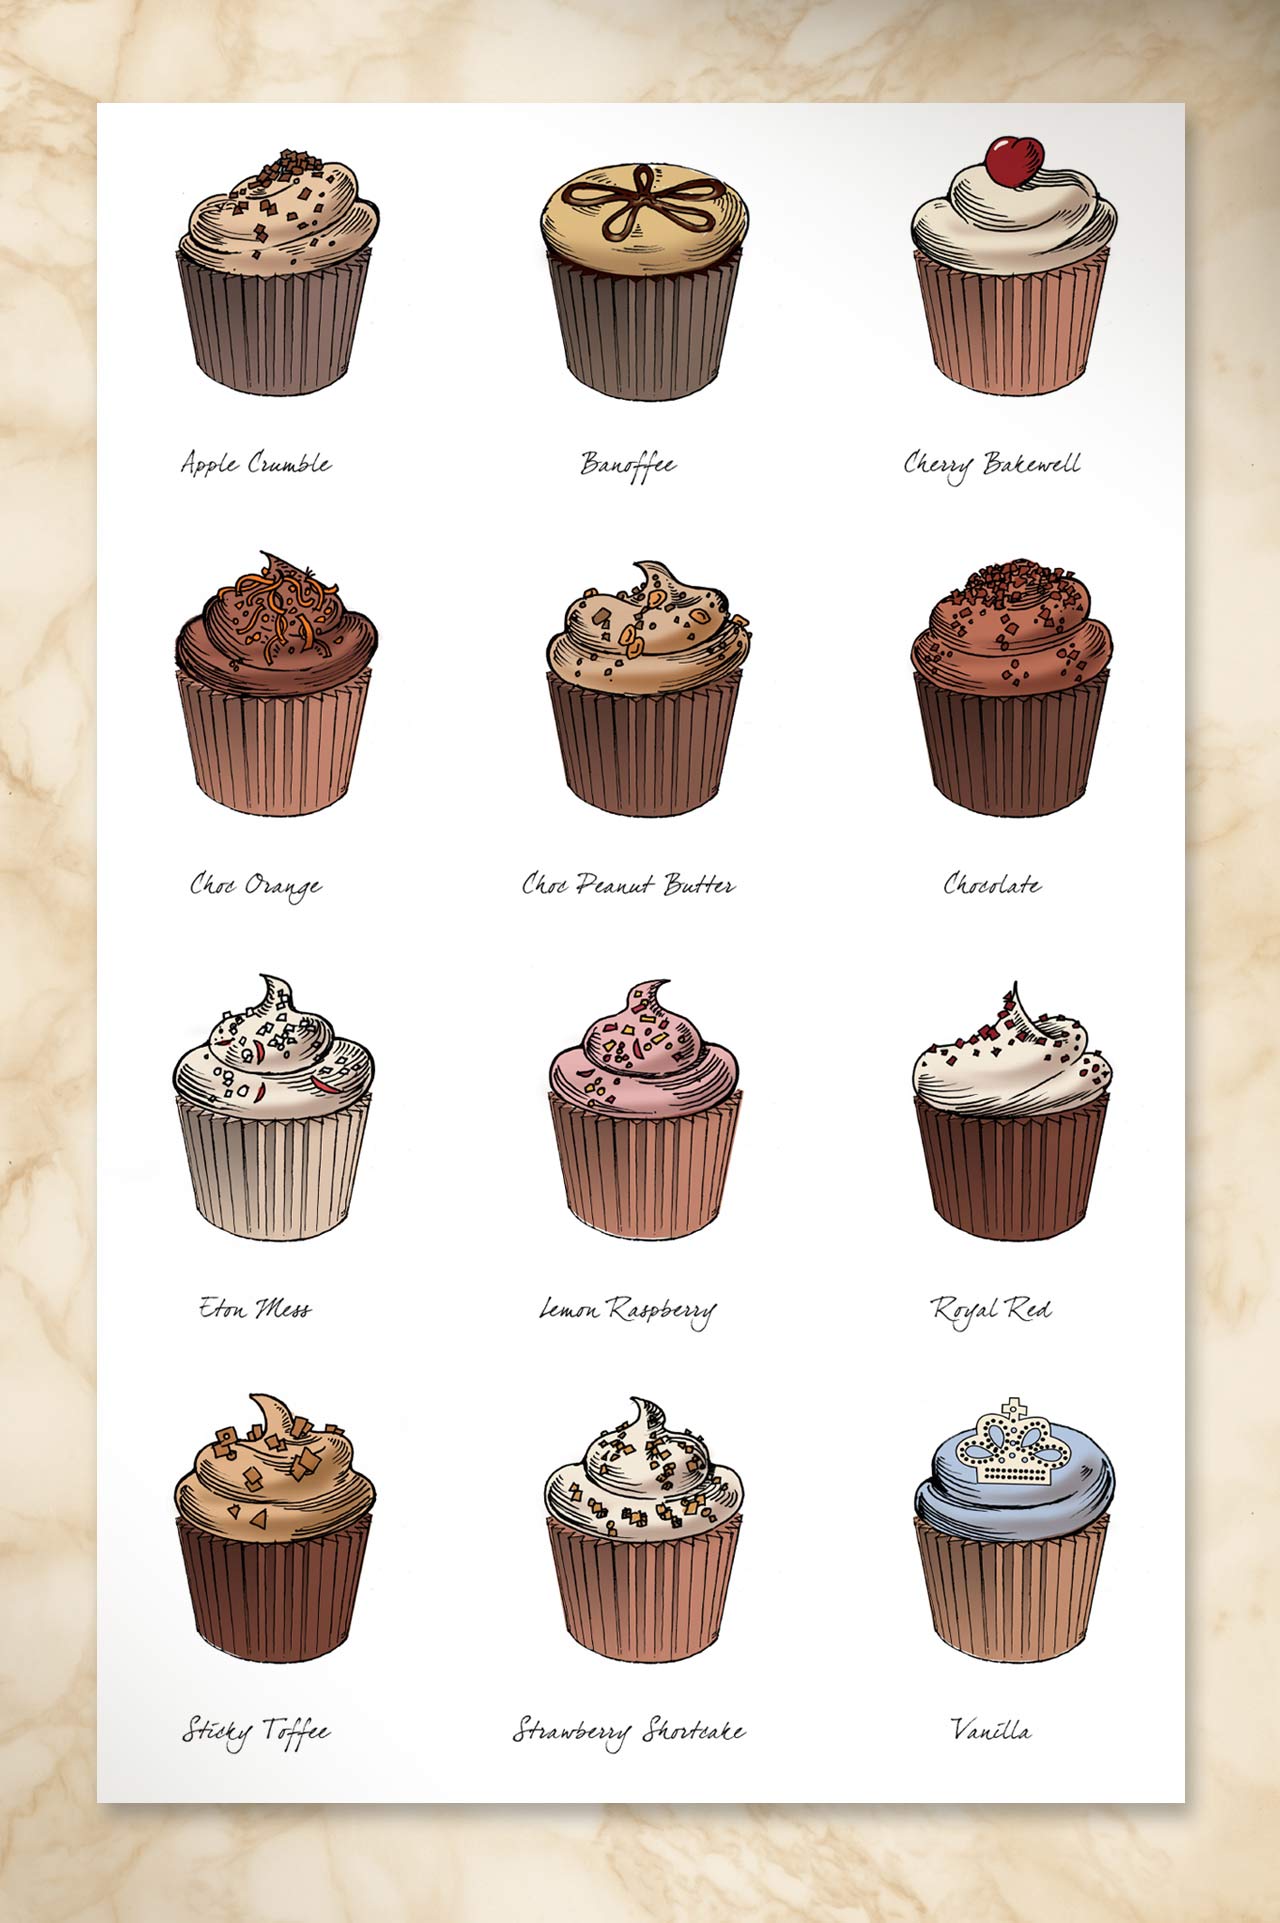 styles of GB Cupcakes